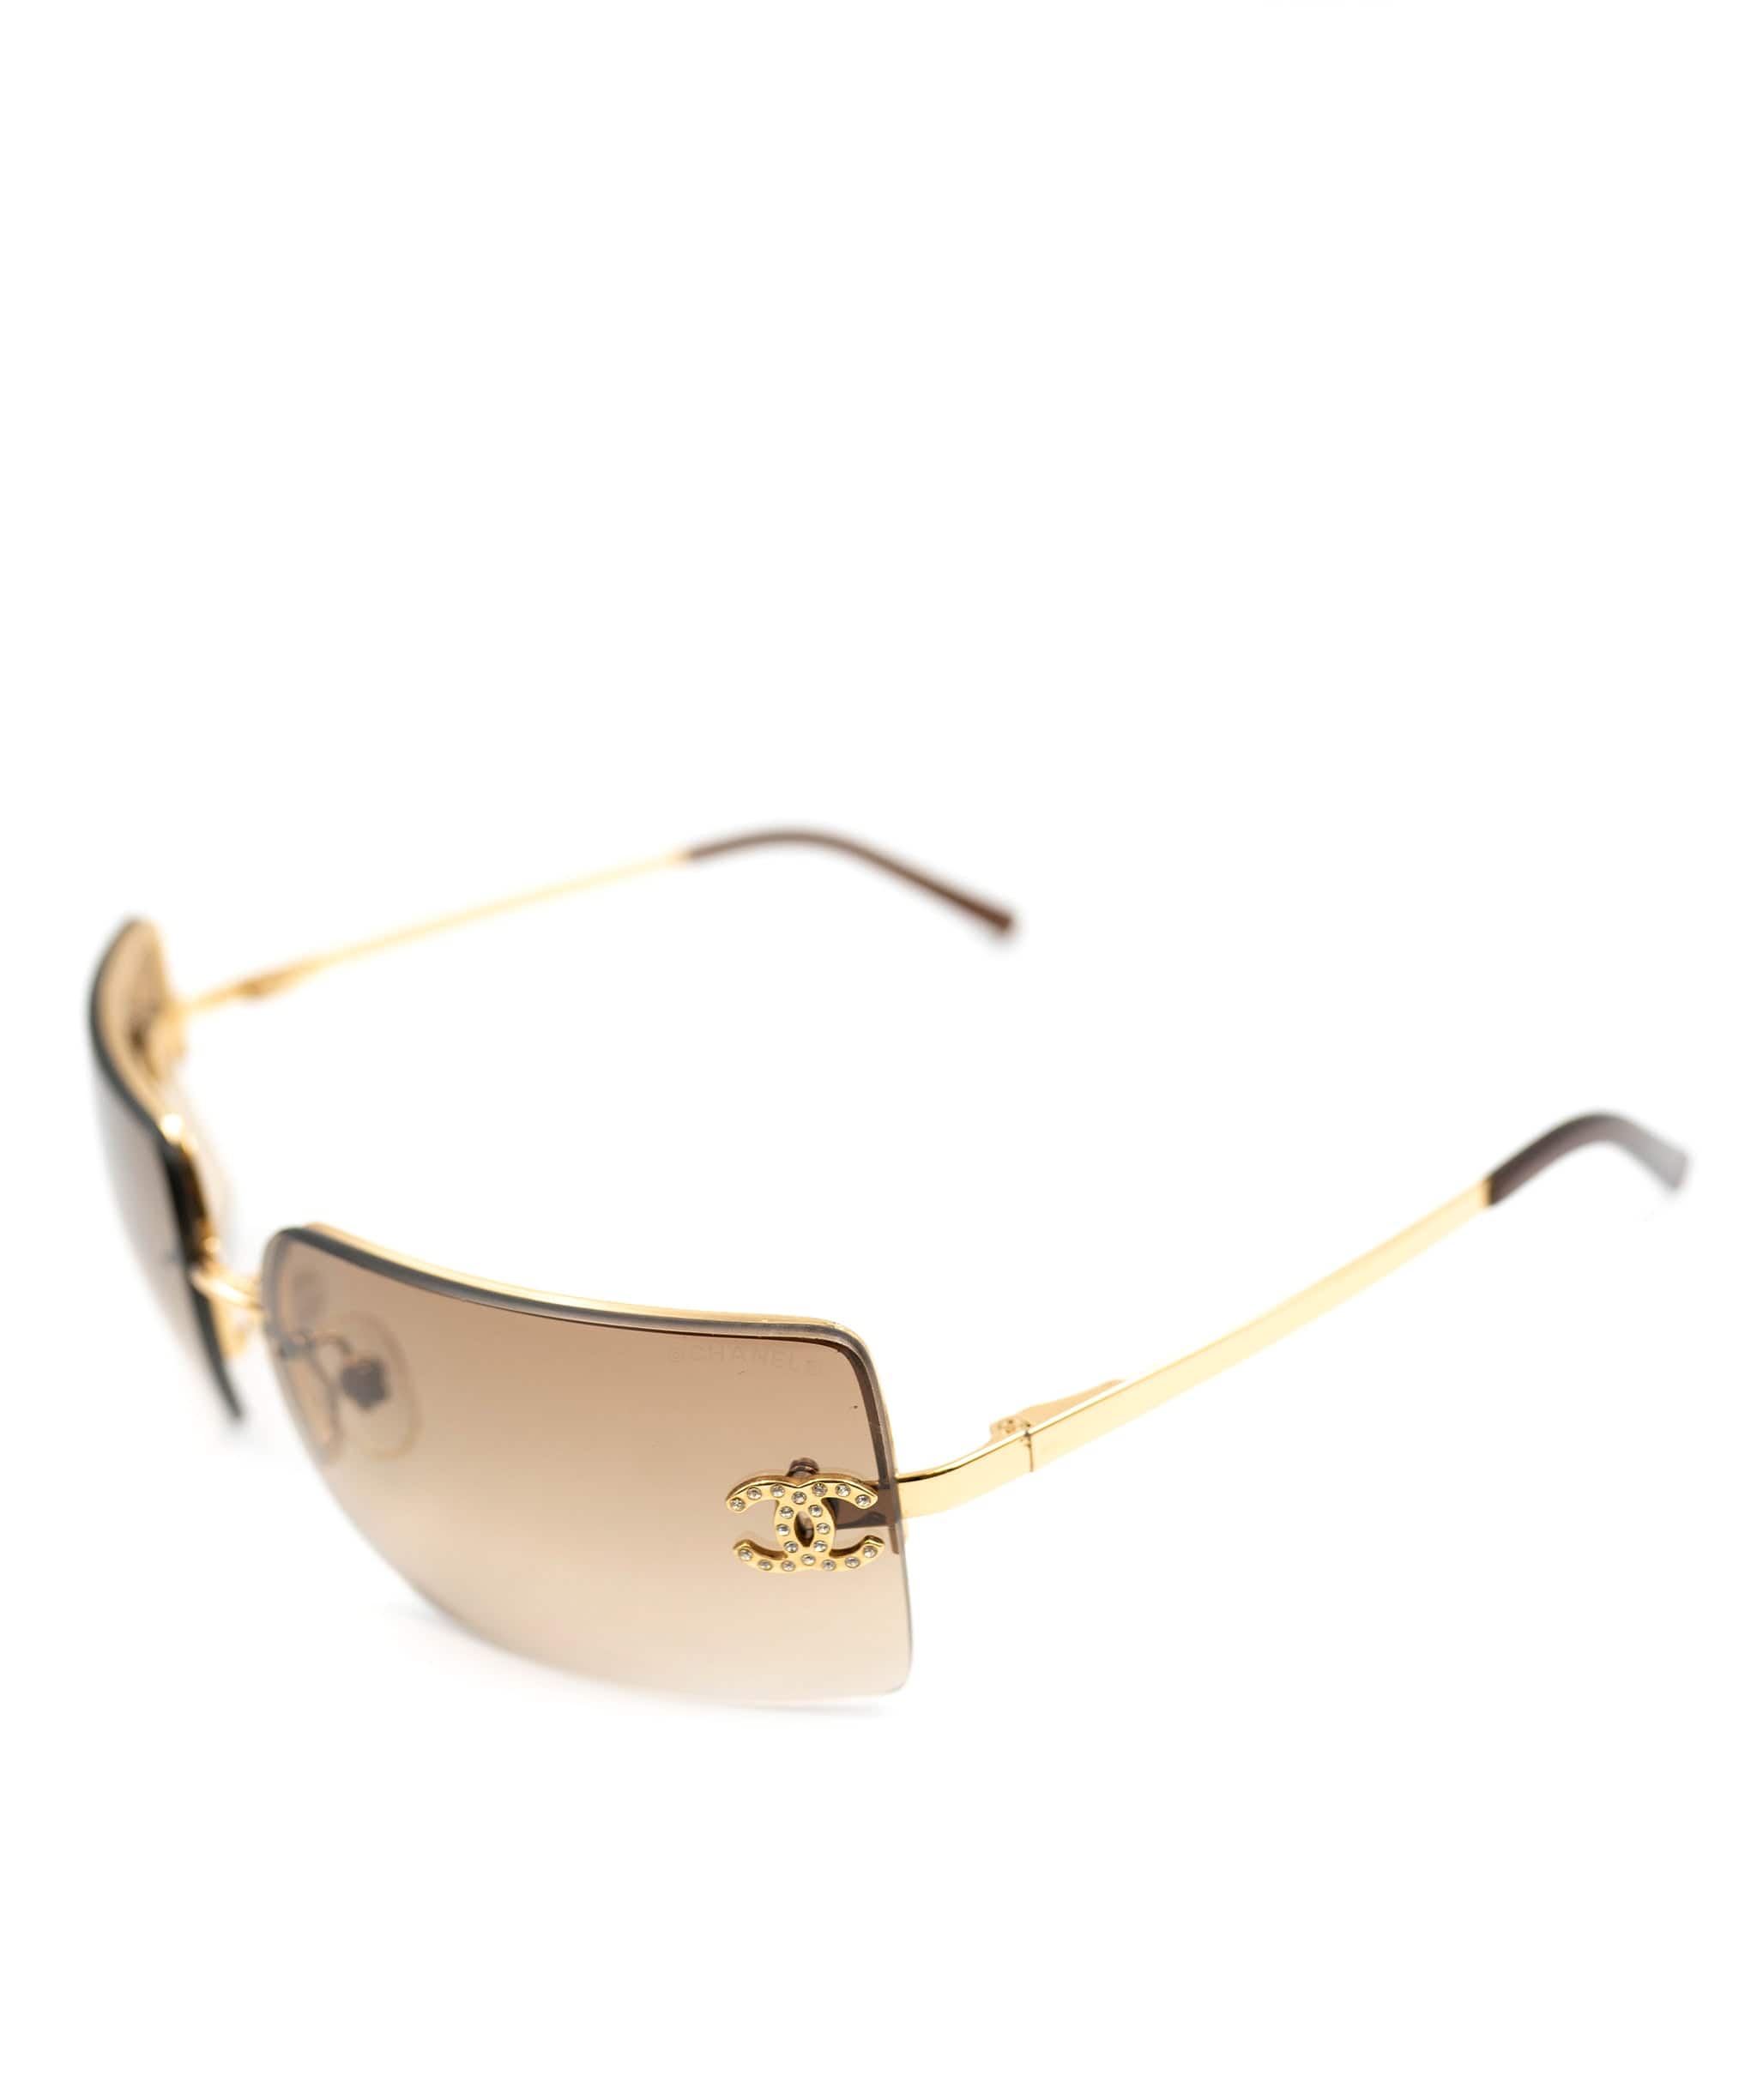 Chanel Chanel Vintage Brown Lens Sunglasses with CC crystals - AWL3592